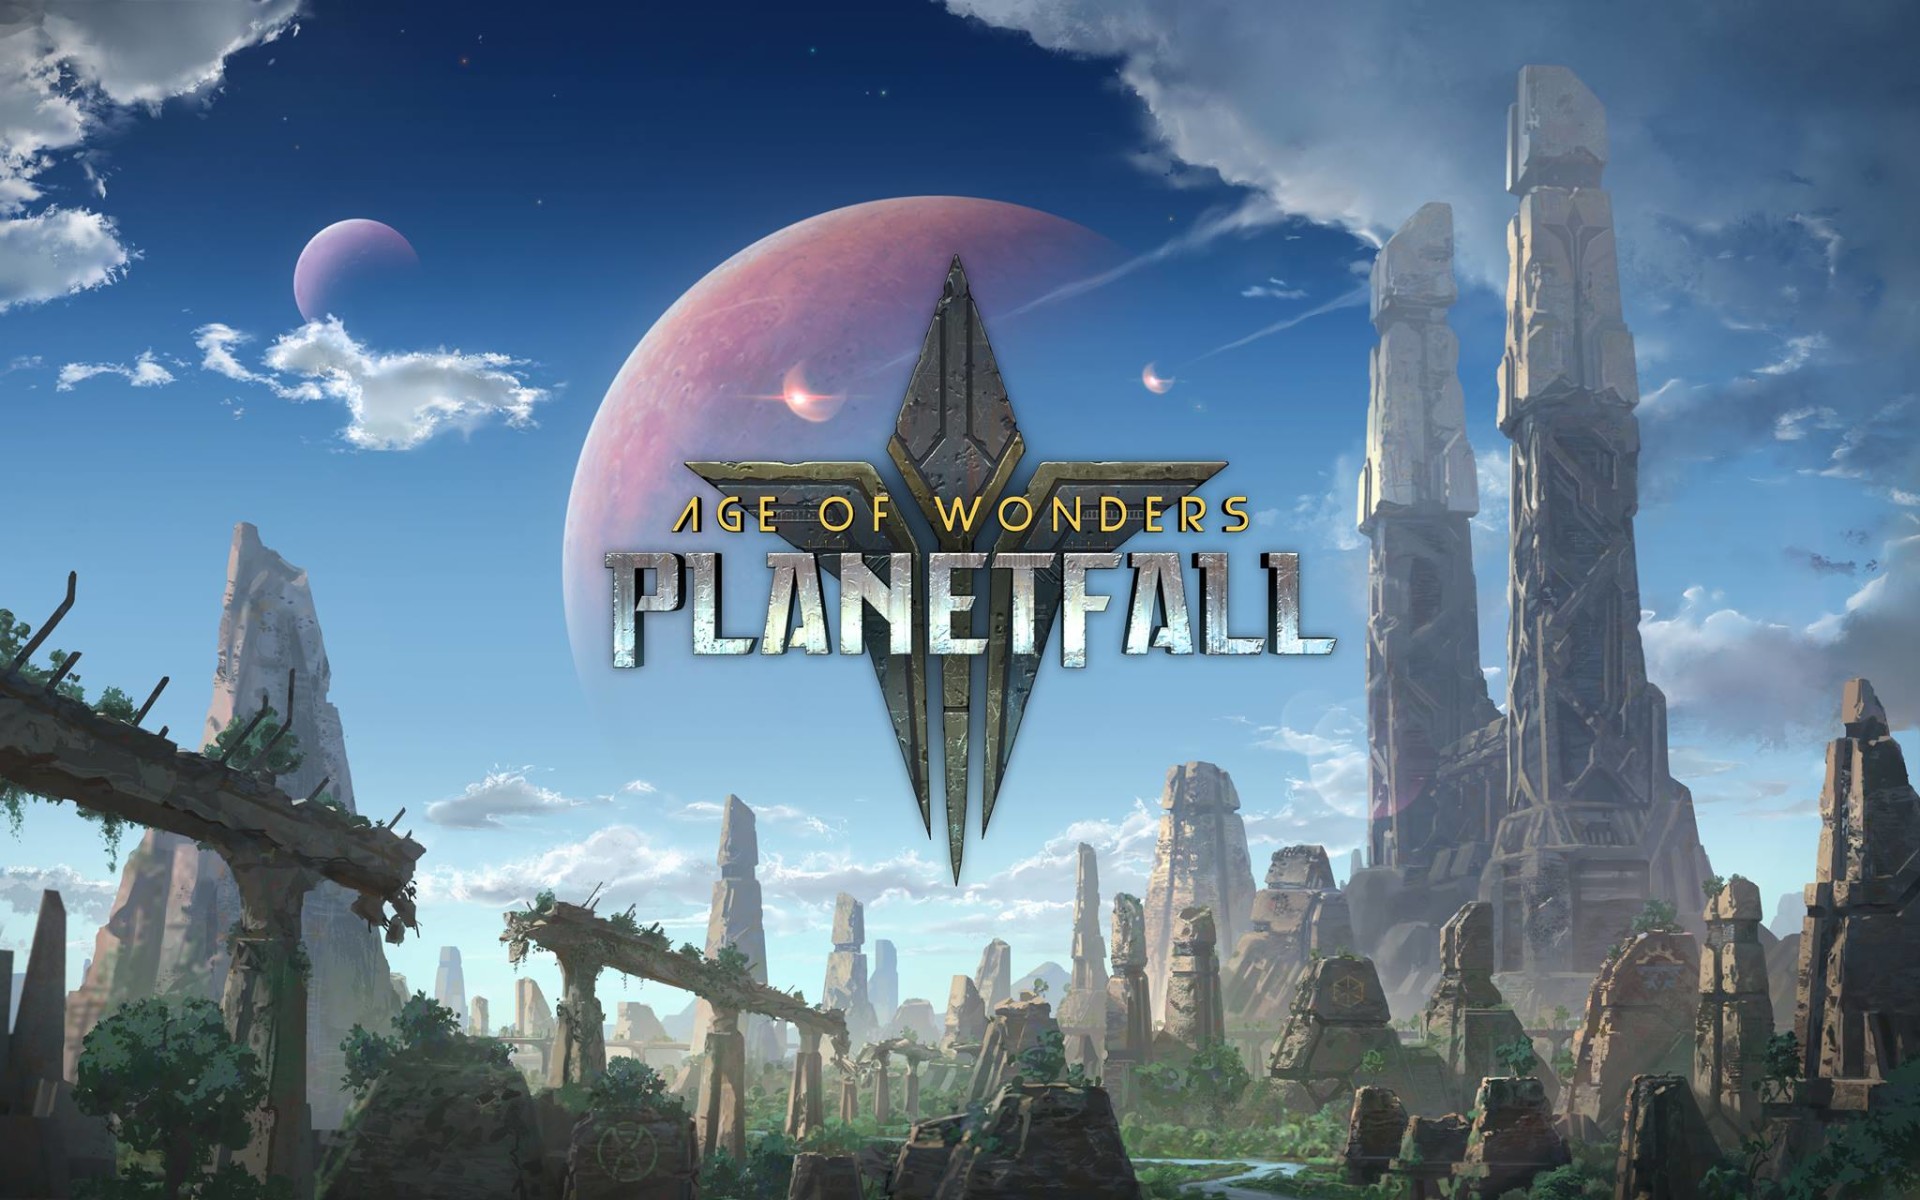 age of wonders planetfall online multiplayer could not login